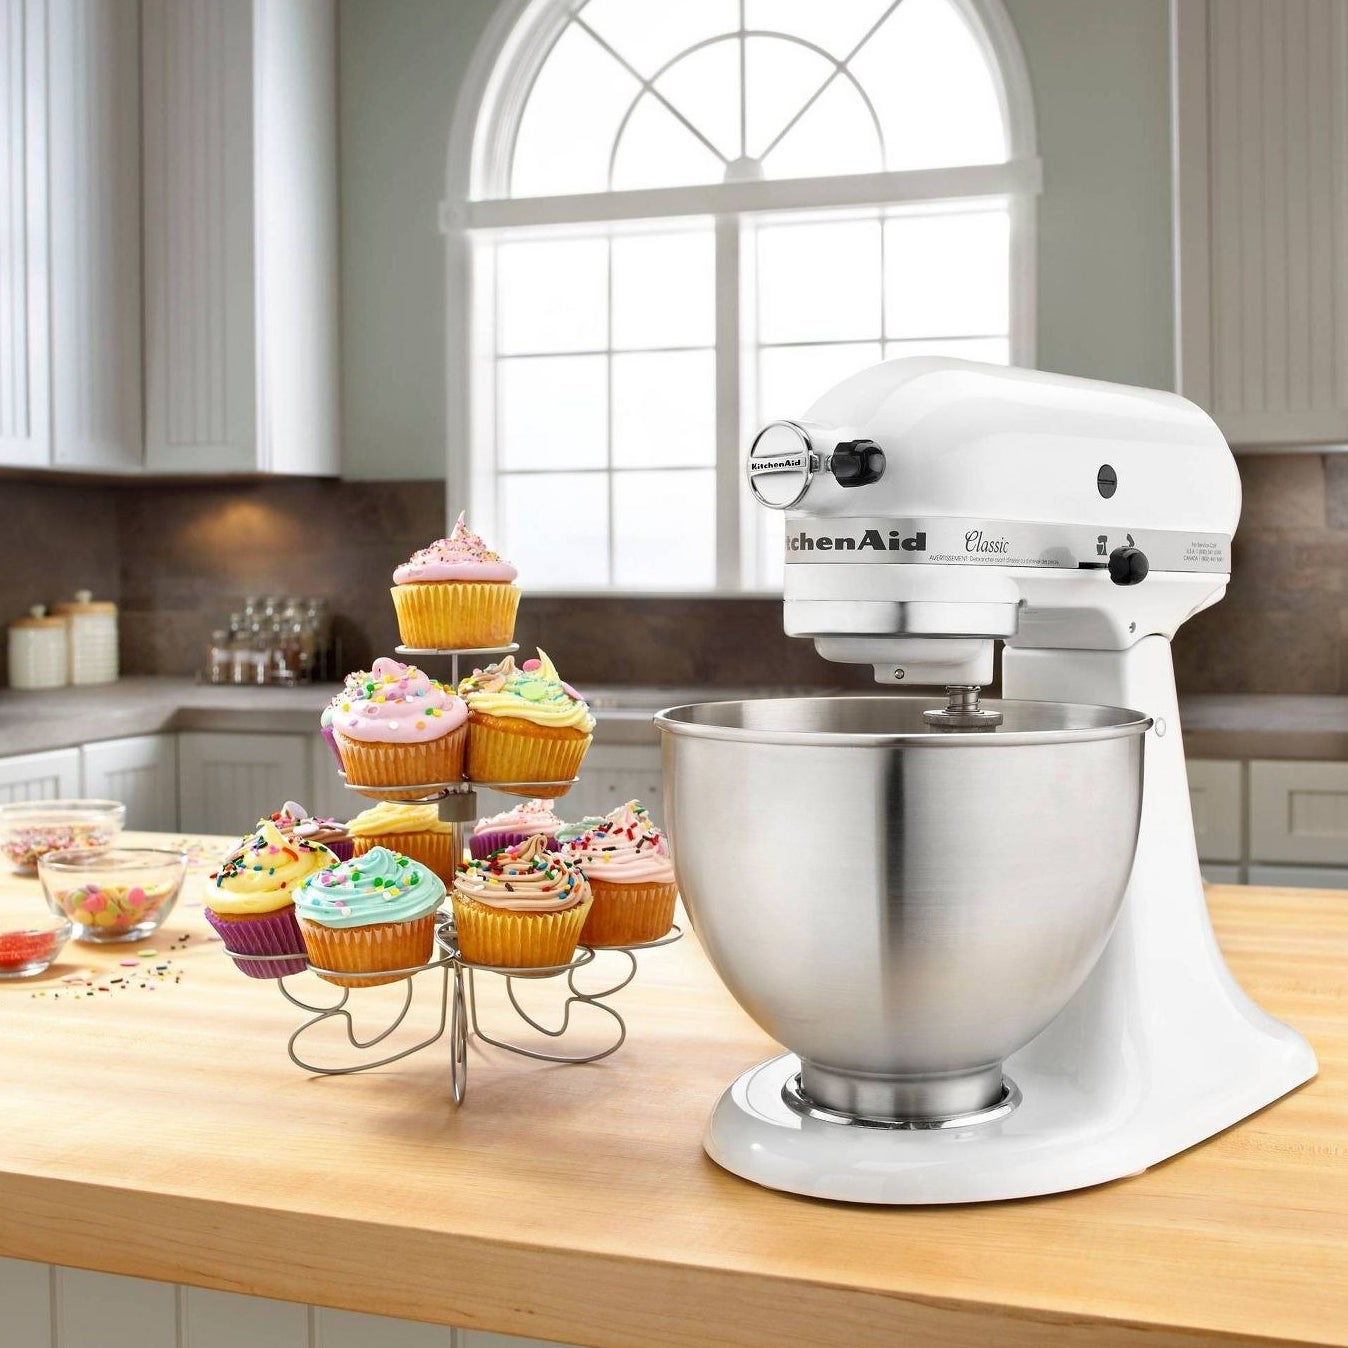 The classic stand mixer